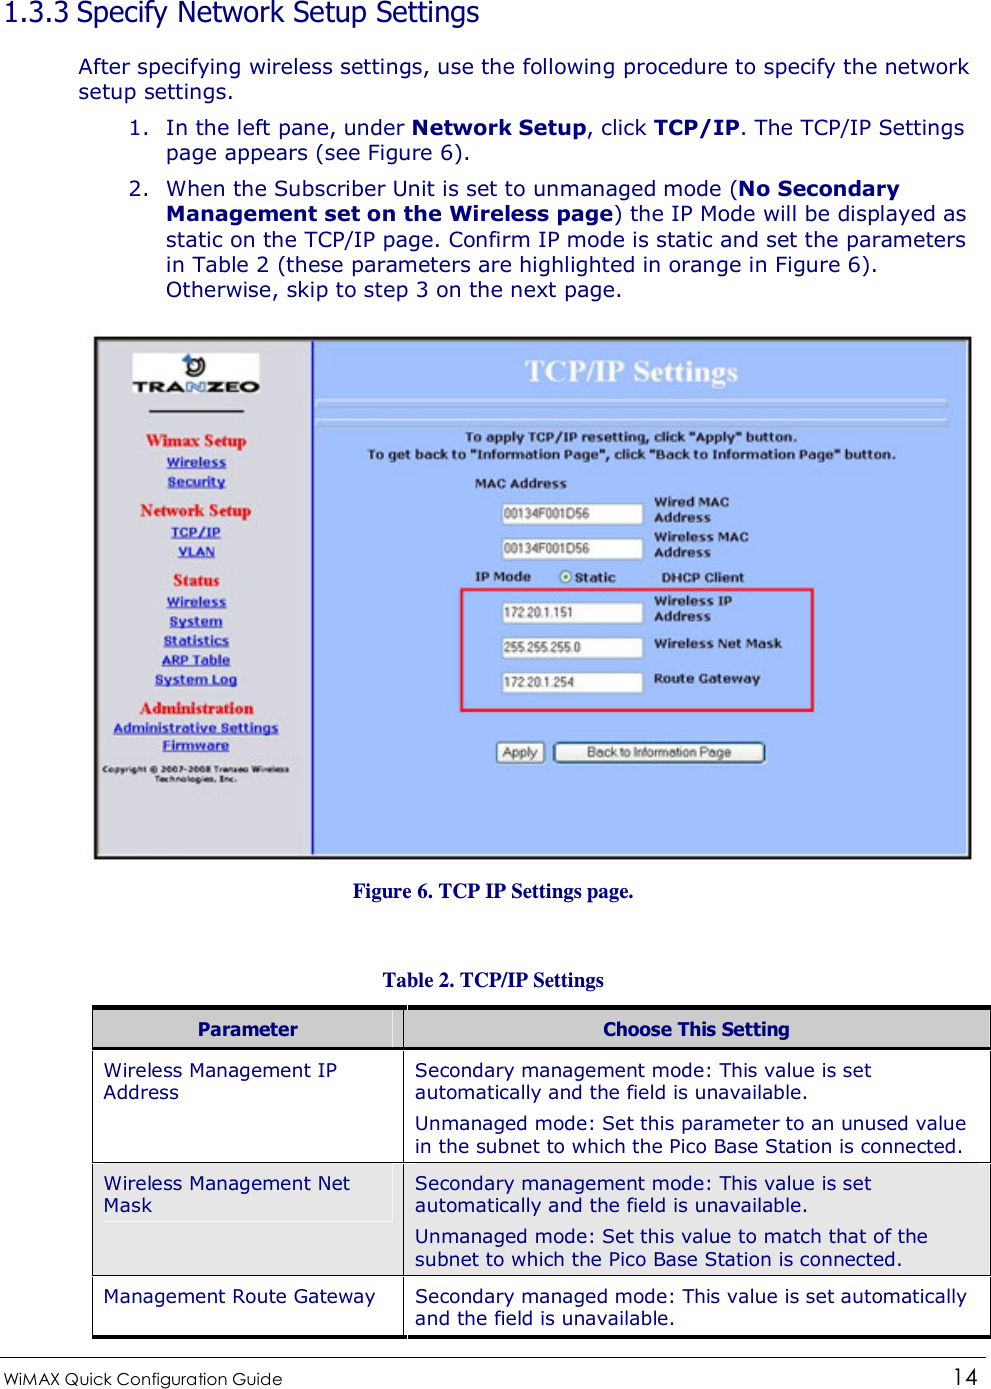  WiMAX Quick Configuration Guide   14    1.3.3 Specify Network Setup Settings After specifying wireless settings, use the following procedure to specify the network setup settings. 1. In the left pane, under Network Setup, click TCP/IP. The TCP/IP Settings page appears (see Figure 6). 2. When the Subscriber Unit is set to unmanaged mode (No Secondary Management set on the Wireless page) the IP Mode will be displayed as static on the TCP/IP page. Confirm IP mode is static and set the parameters in Table 2 (these parameters are highlighted in orange in Figure 6). Otherwise, skip to step 3 on the next page.  Figure 6. TCP IP Settings page.  Table 2. TCP/IP Settings Parameter  Choose This Setting Wireless Management IP Address Secondary management mode: This value is set automatically and the field is unavailable.  Unmanaged mode: Set this parameter to an unused value in the subnet to which the Pico Base Station is connected. Wireless Management Net Mask Secondary management mode: This value is set automatically and the field is unavailable. Unmanaged mode: Set this value to match that of the subnet to which the Pico Base Station is connected. Management Route Gateway  Secondary managed mode: This value is set automatically and the field is unavailable. 